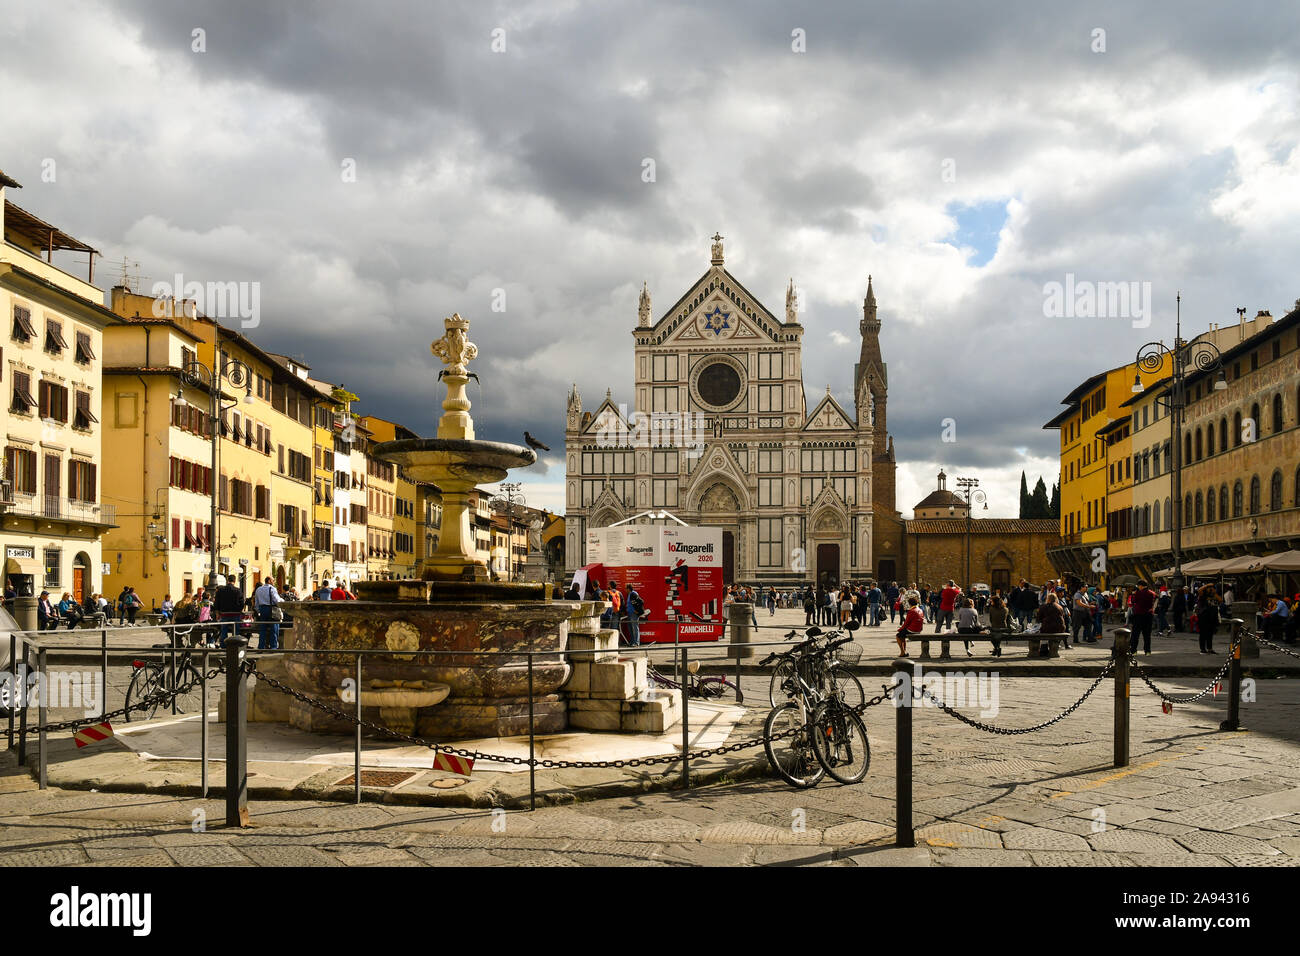 Scenic view of Piazza Santa Croce square with the fountain and the famous Basilica di Santa Croce (Holy Cross Basilica), Florence, Tuscany, Italy Stock Photo